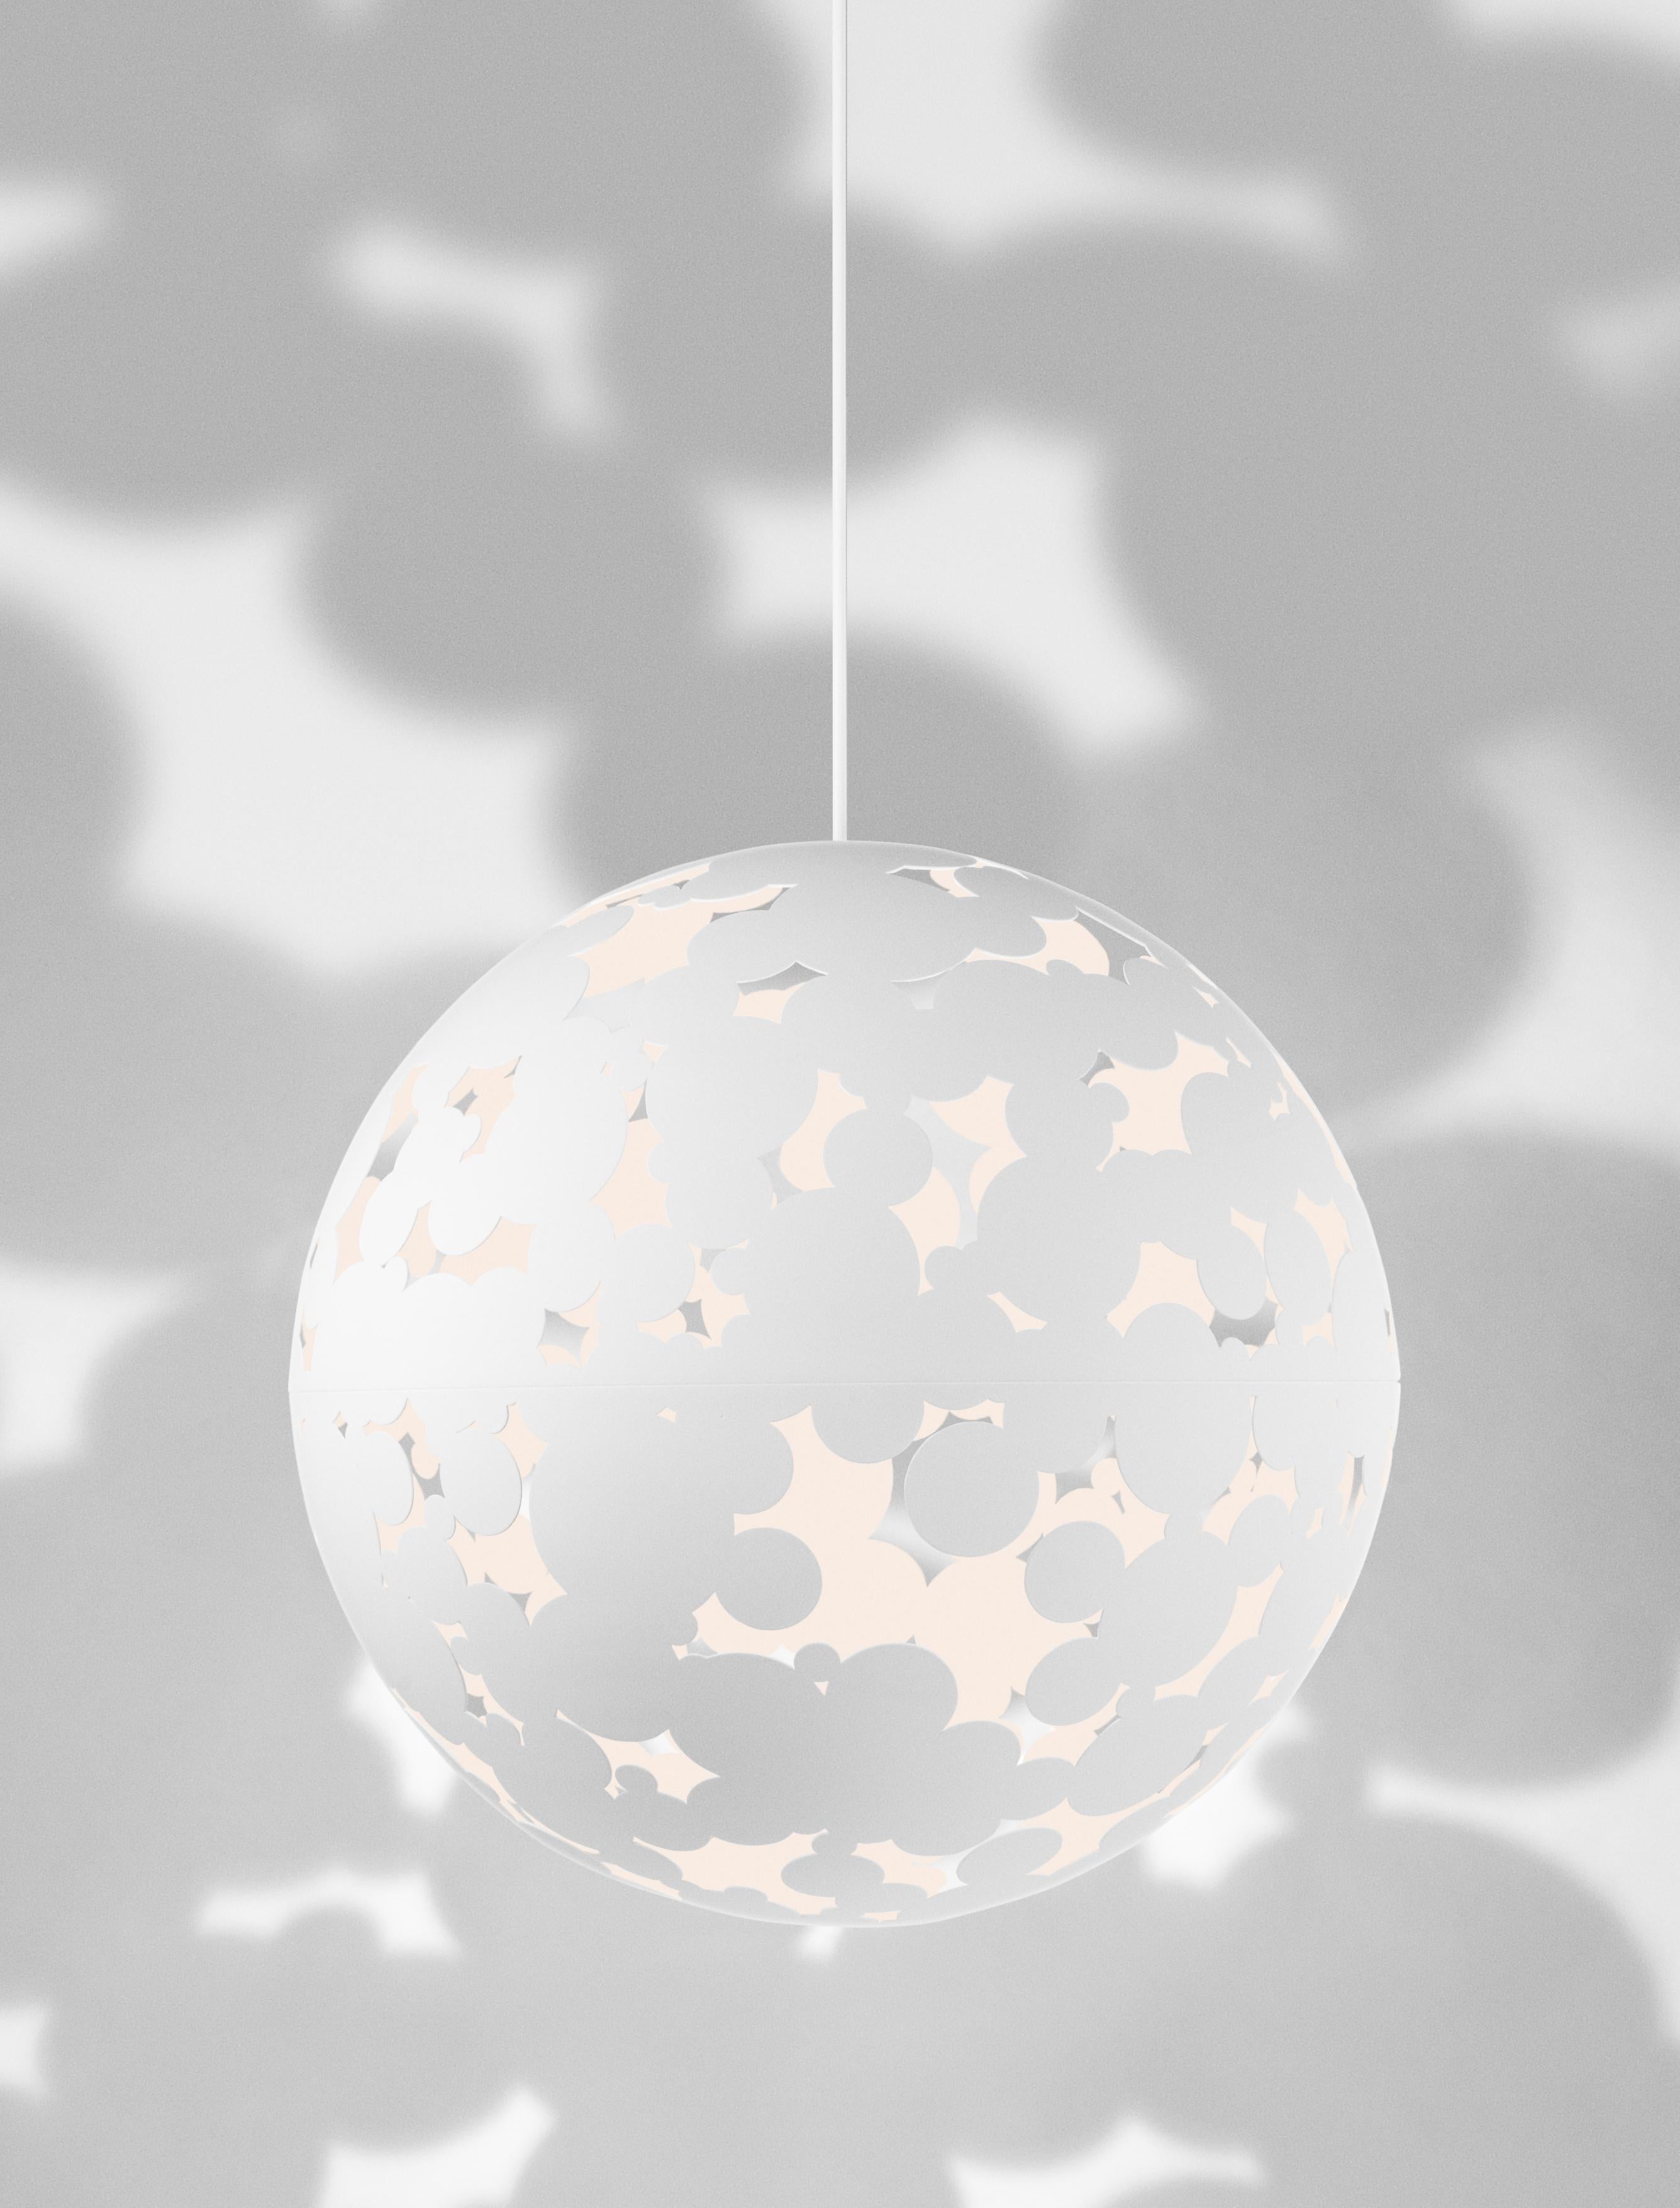 The Camouflage 500 pendant creates luminous patterns of light through its playful laser cut aluminum shade. A Front Design original manufactured in Sweden, it comes in palest white and other colors upon request.

Environment: Indoor
Shade: